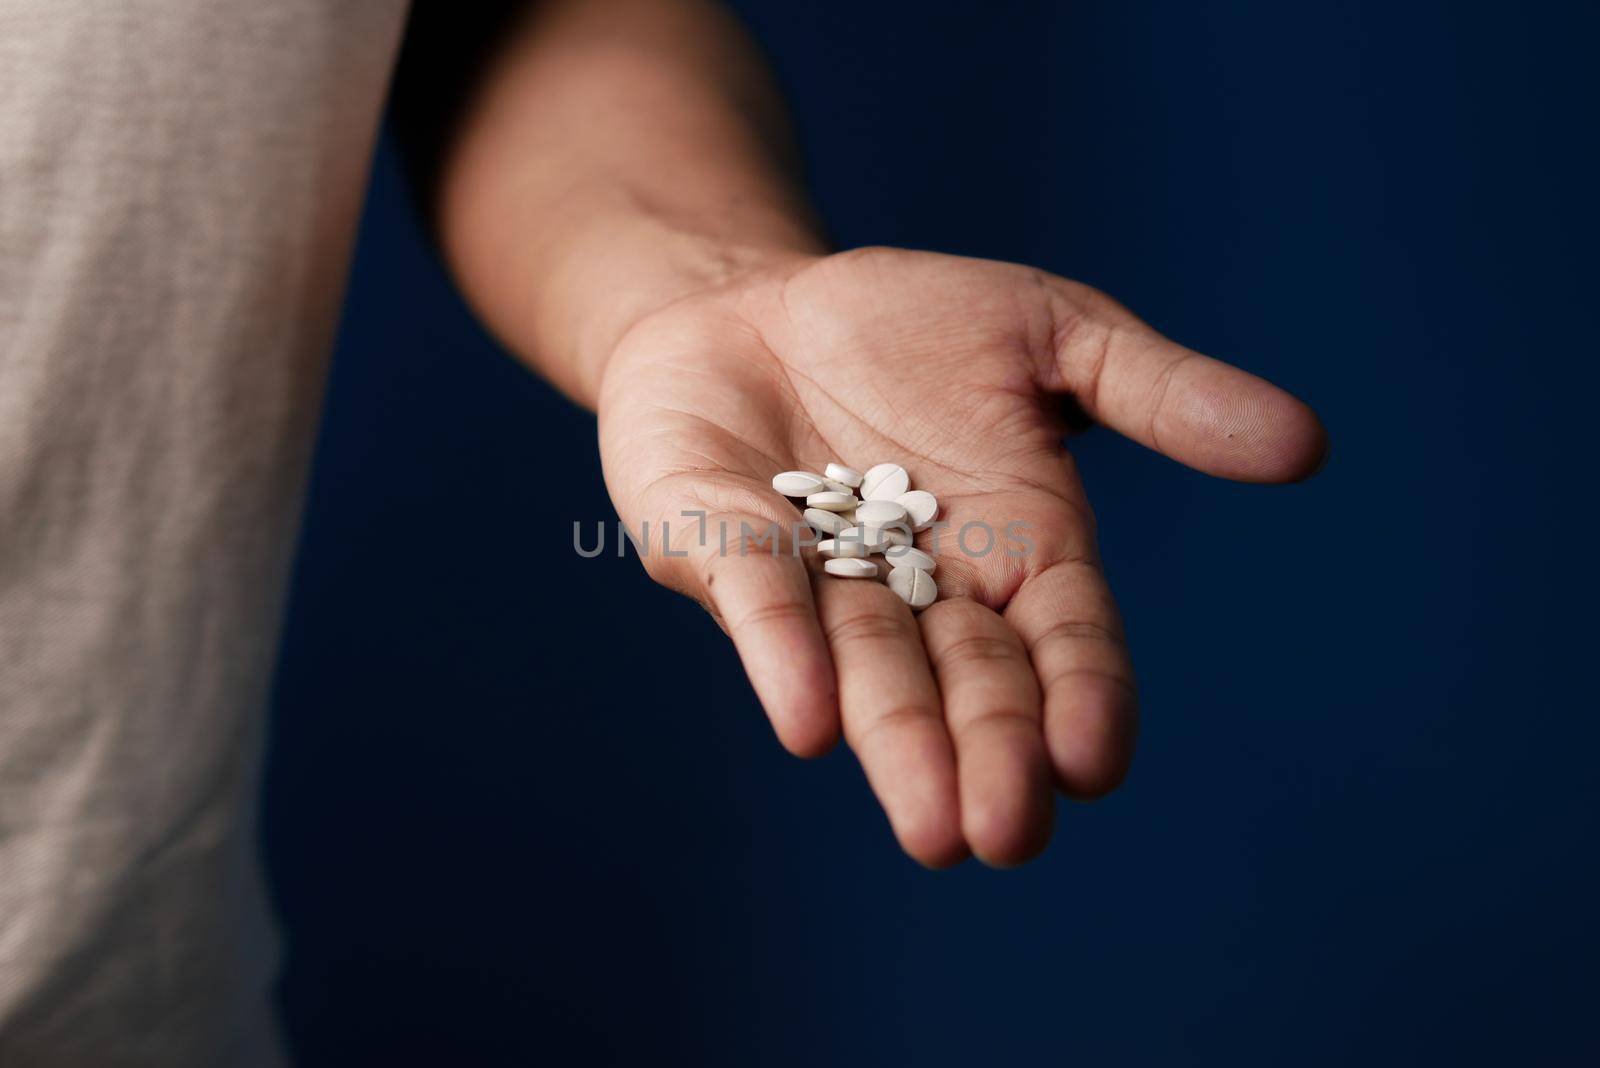 man's hand with pills spilled out of the container .